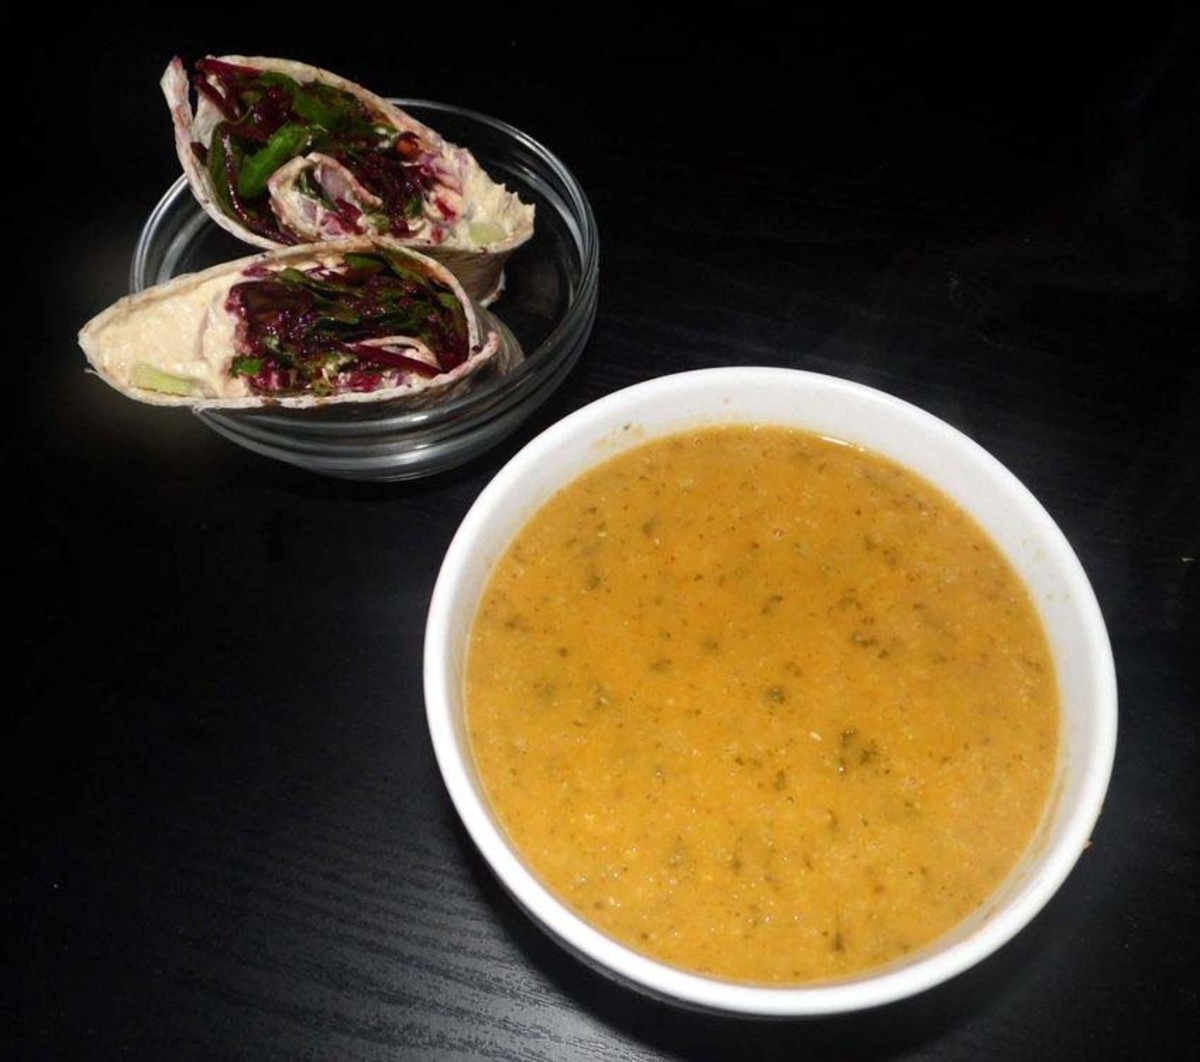 butternut squash soup with seeded wraps, hummus and salad